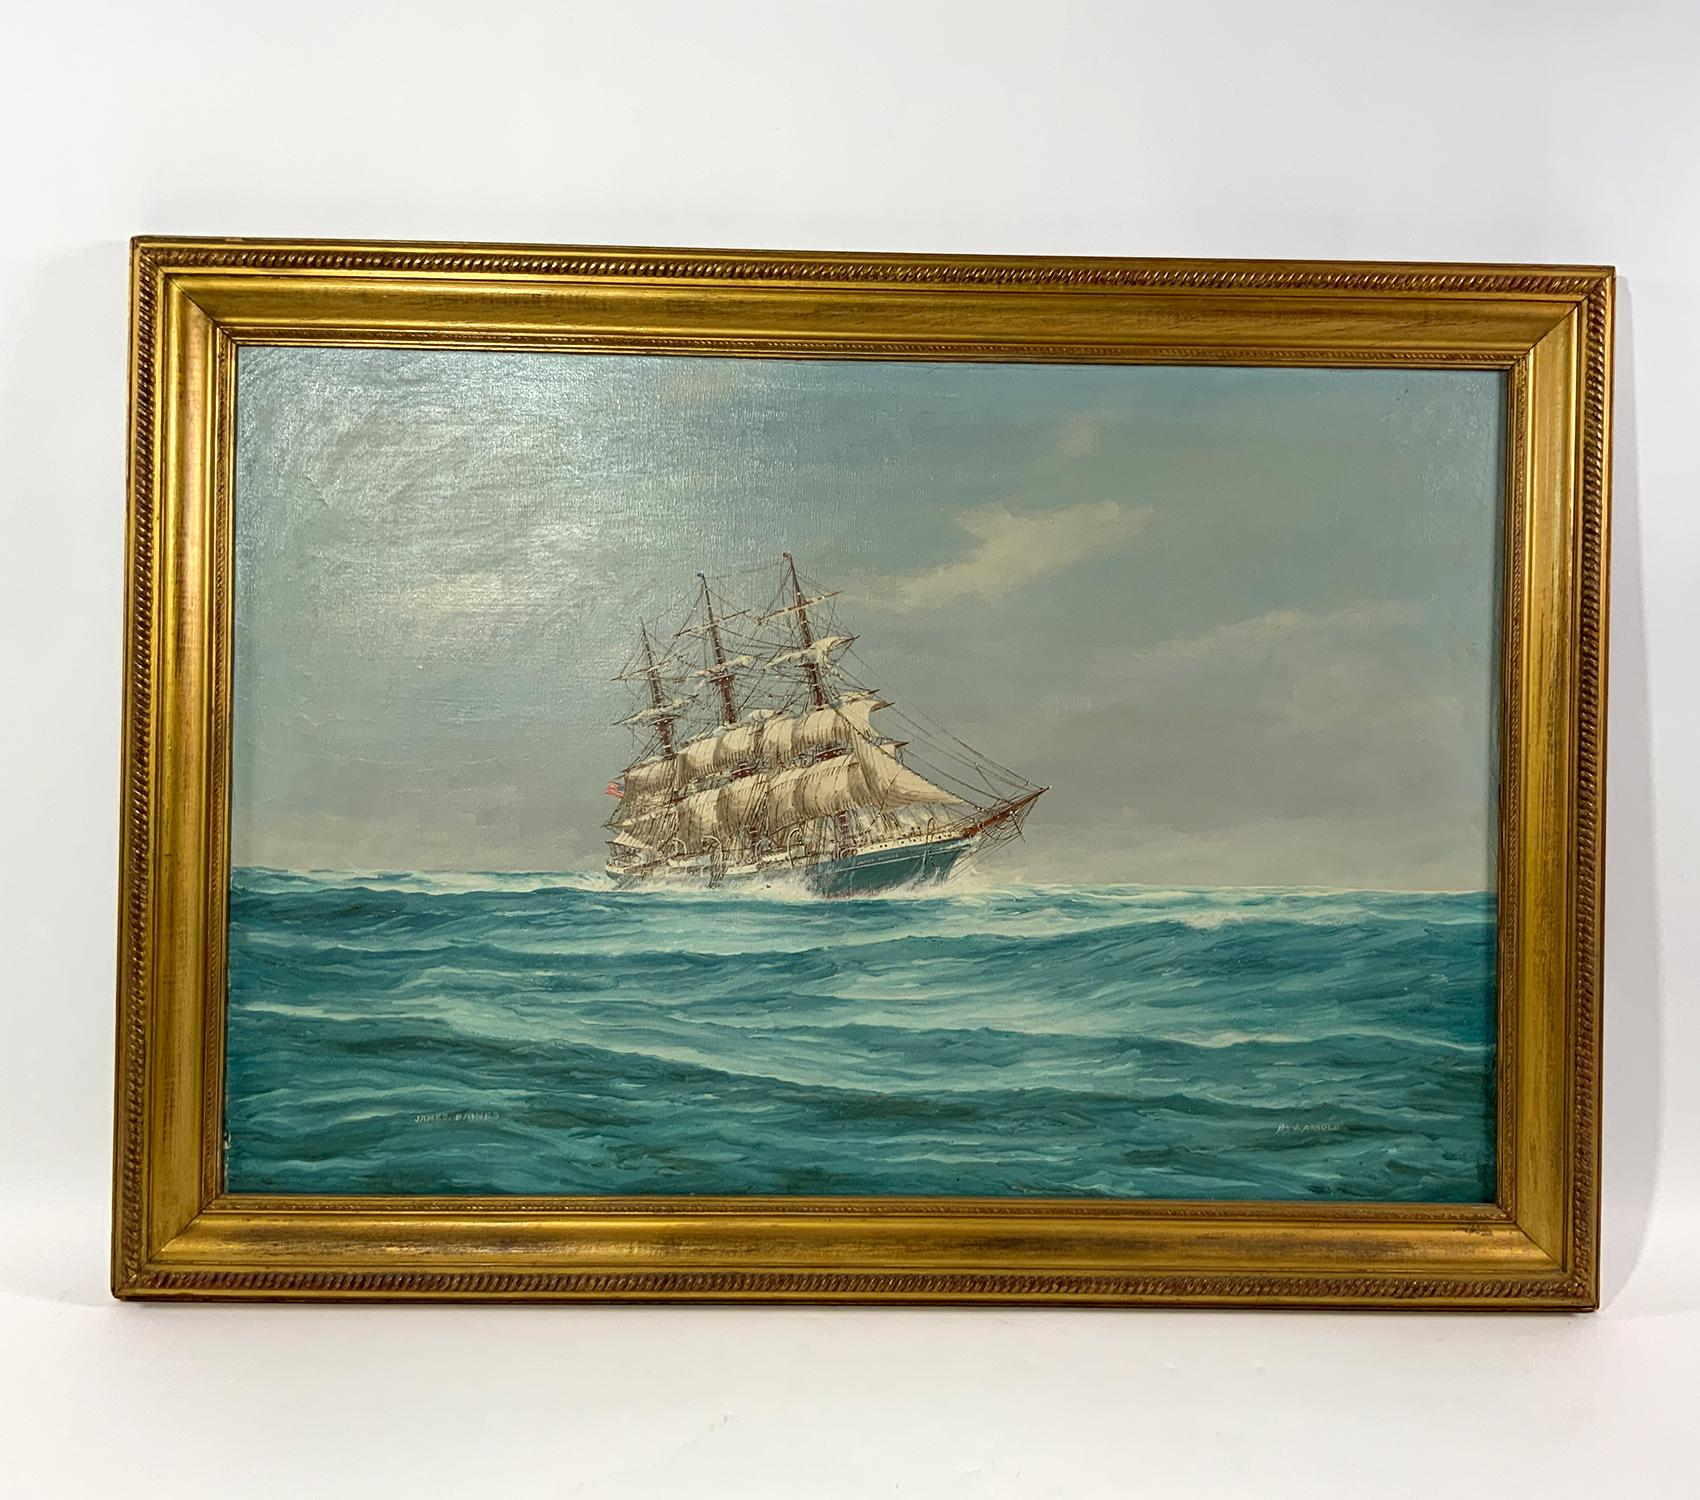 Painting of the clipper chip James Baines by Jarnold of Nantucket. Ship is shown cruising through moderate seas under shortened sail. Large bright canvas. Circa 1940.